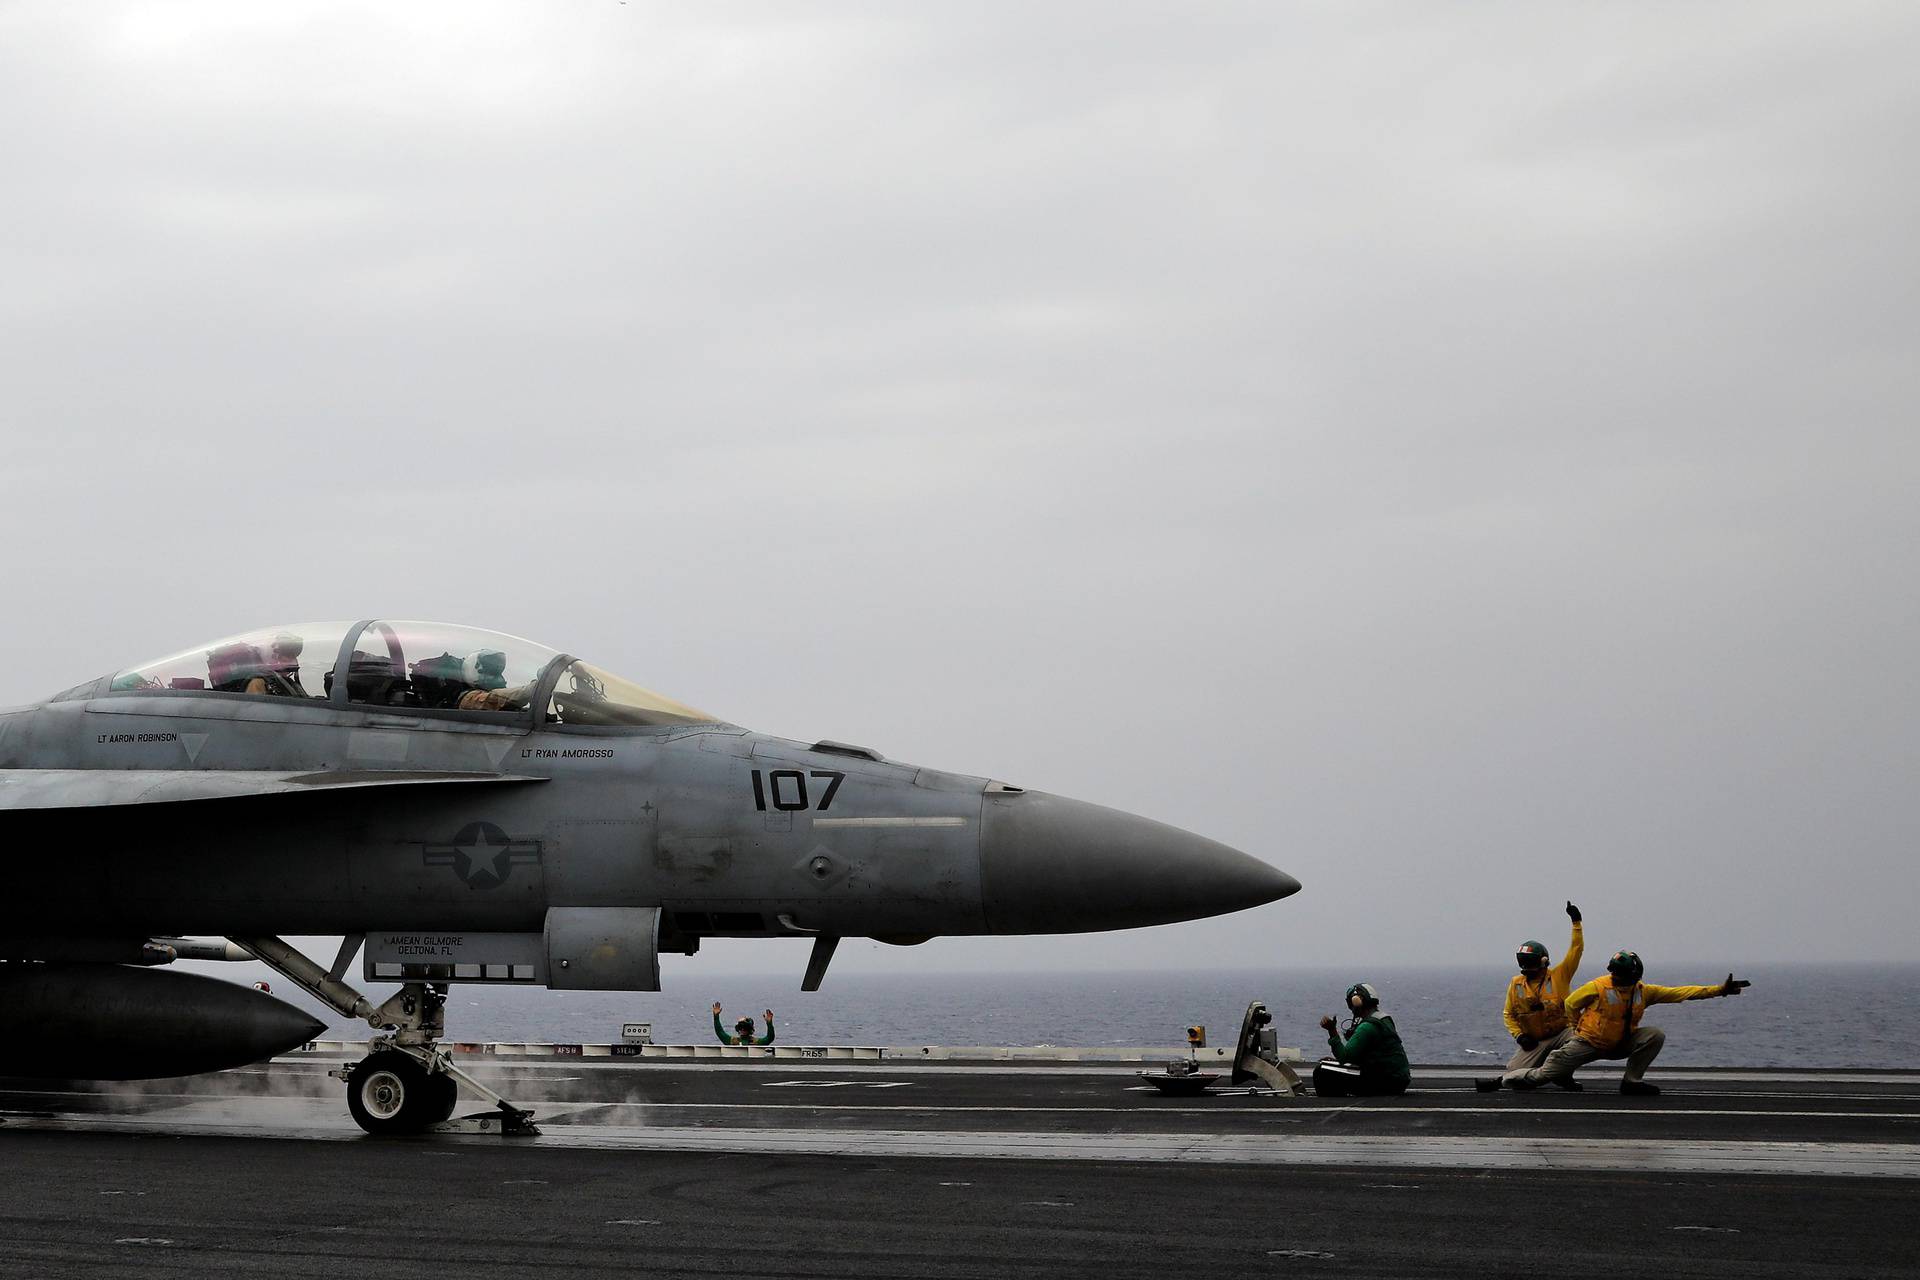 FILE PHOTO: U.S. Navy catapult officers signal to an F/A-18 fighter jet pilot for a safe take off, aboard the USS Harry S. Truman aircraft carrier in the eastern Mediterranean Sea